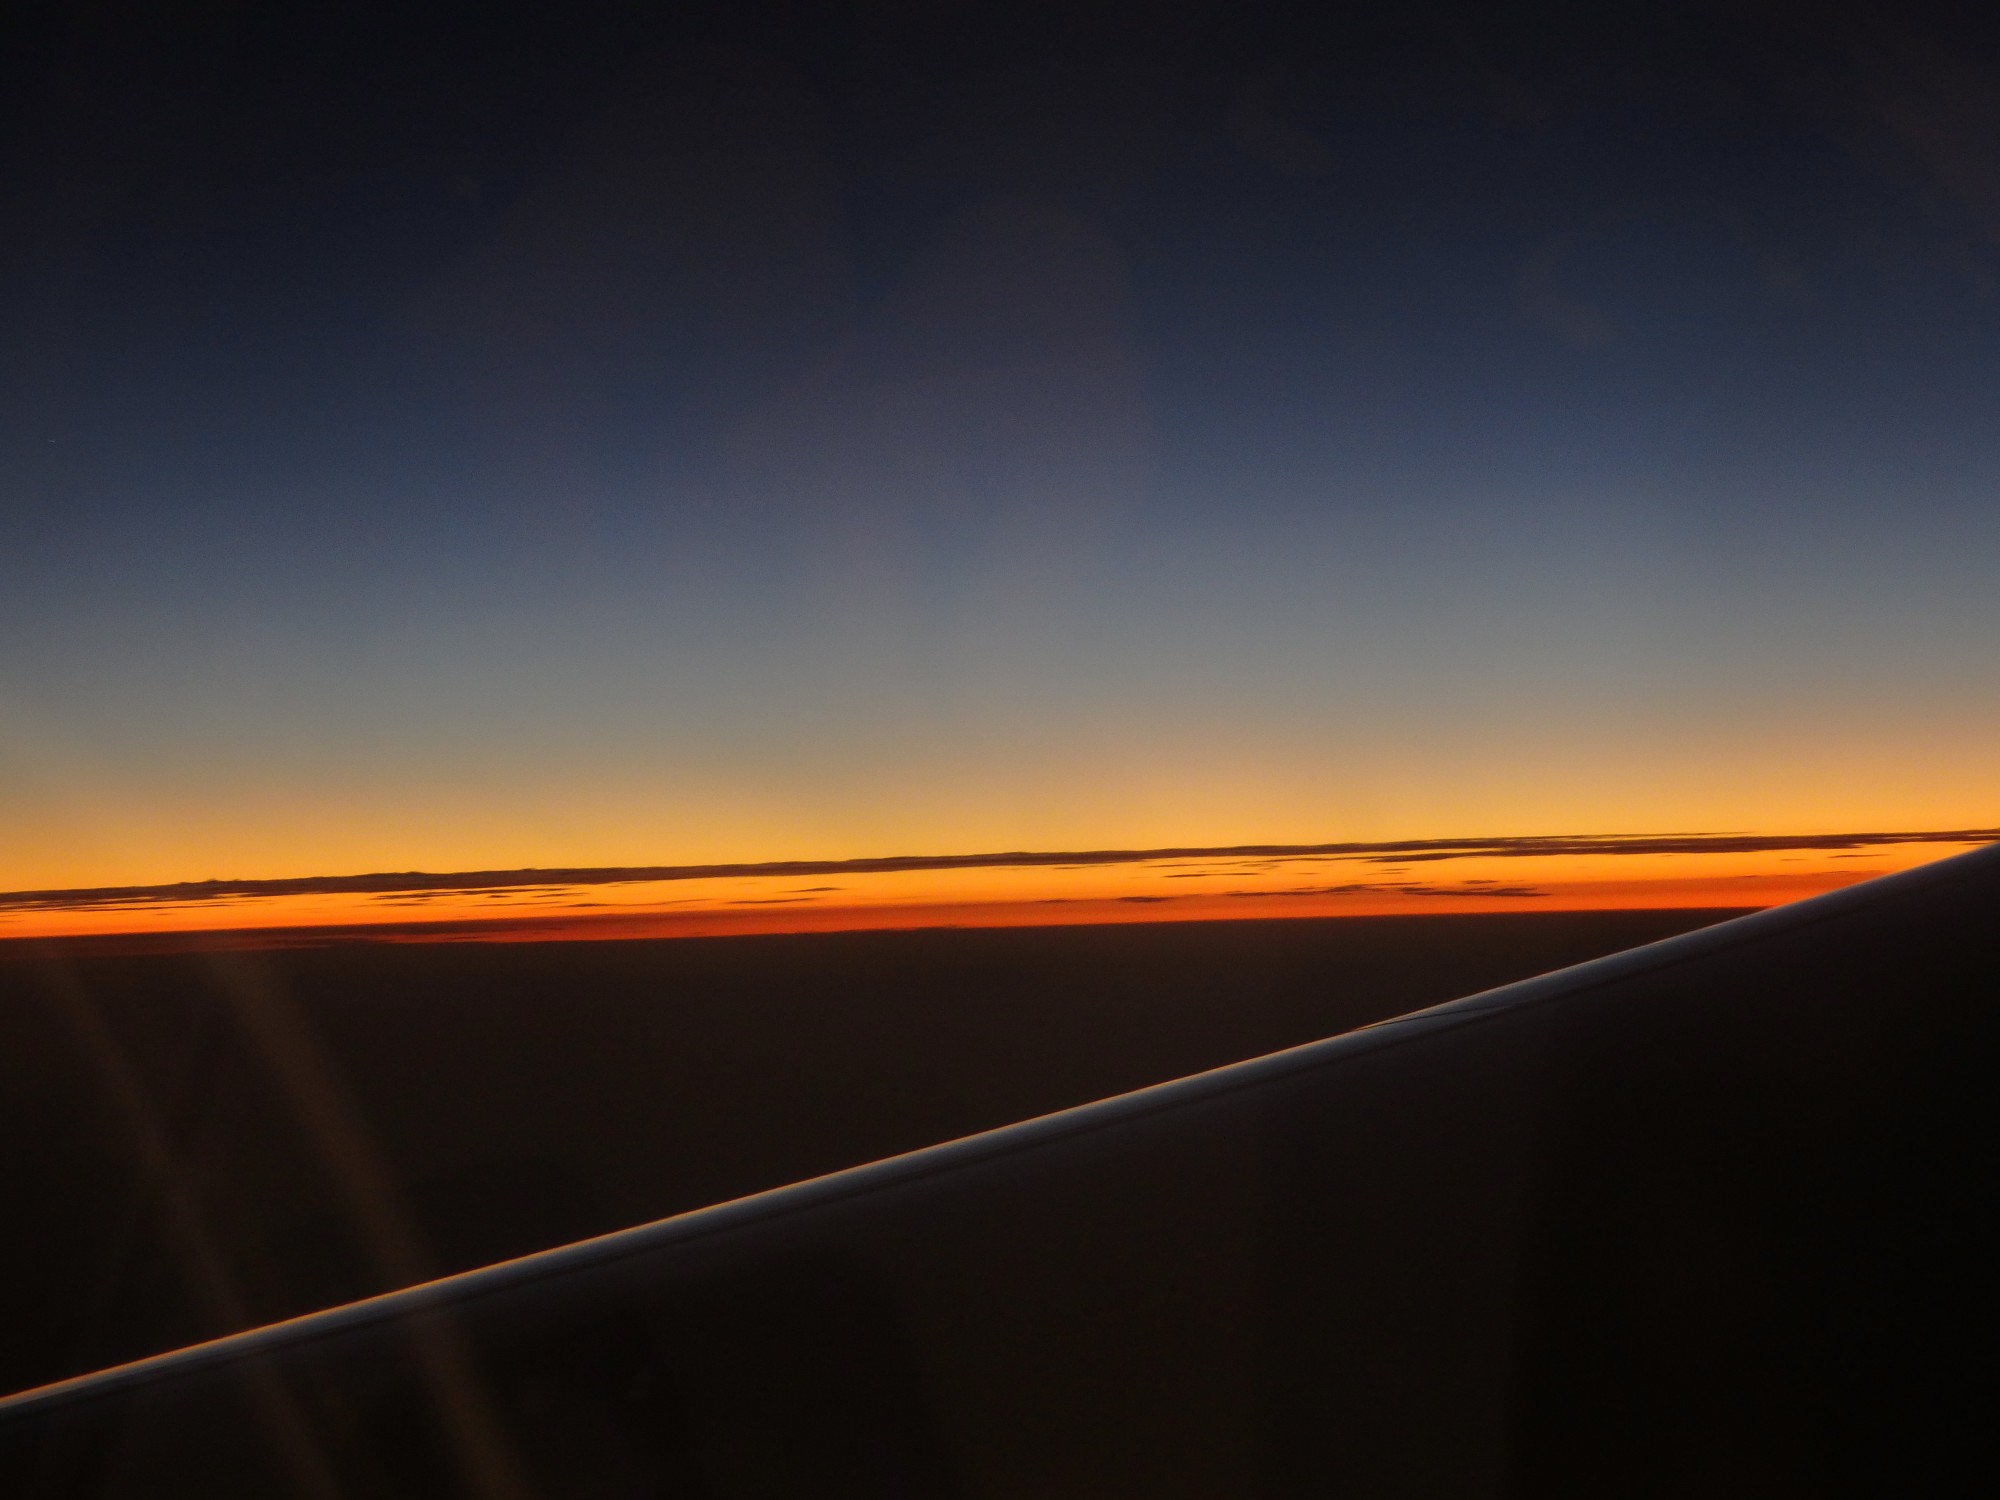 sunset as a pilot and passengers might see it from a plane